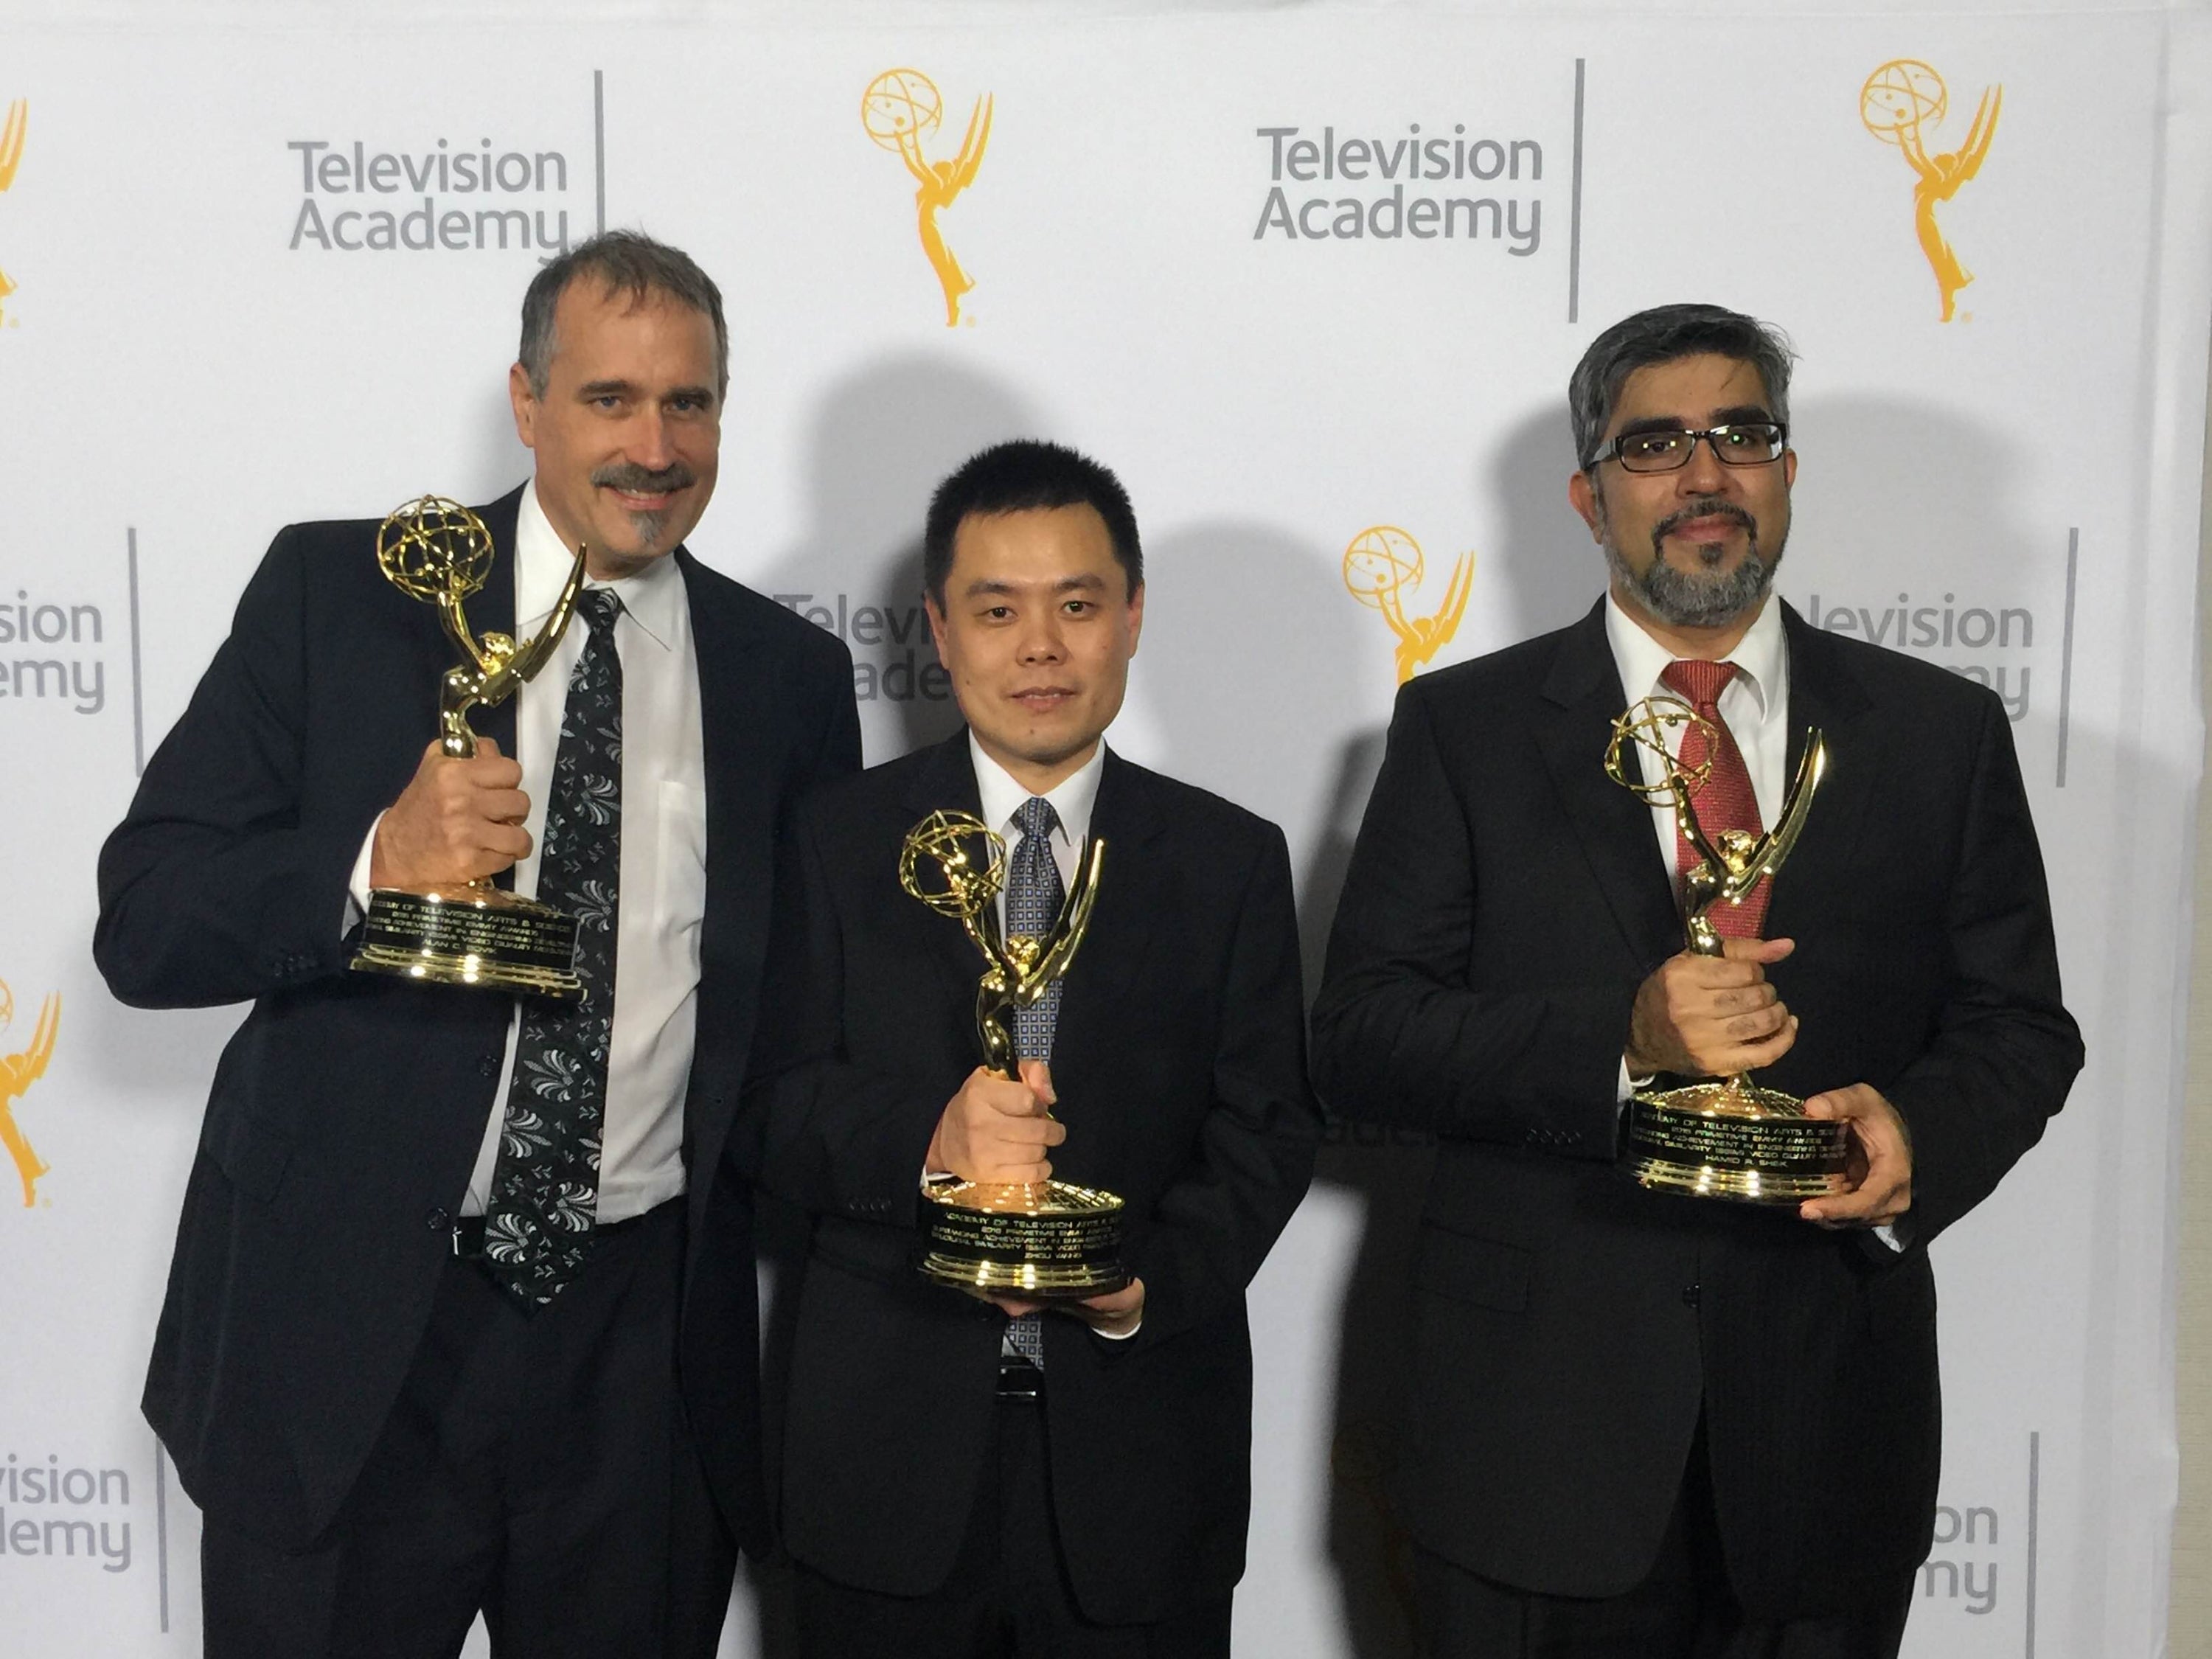 Zhou Wang and his colleagues with their awards.